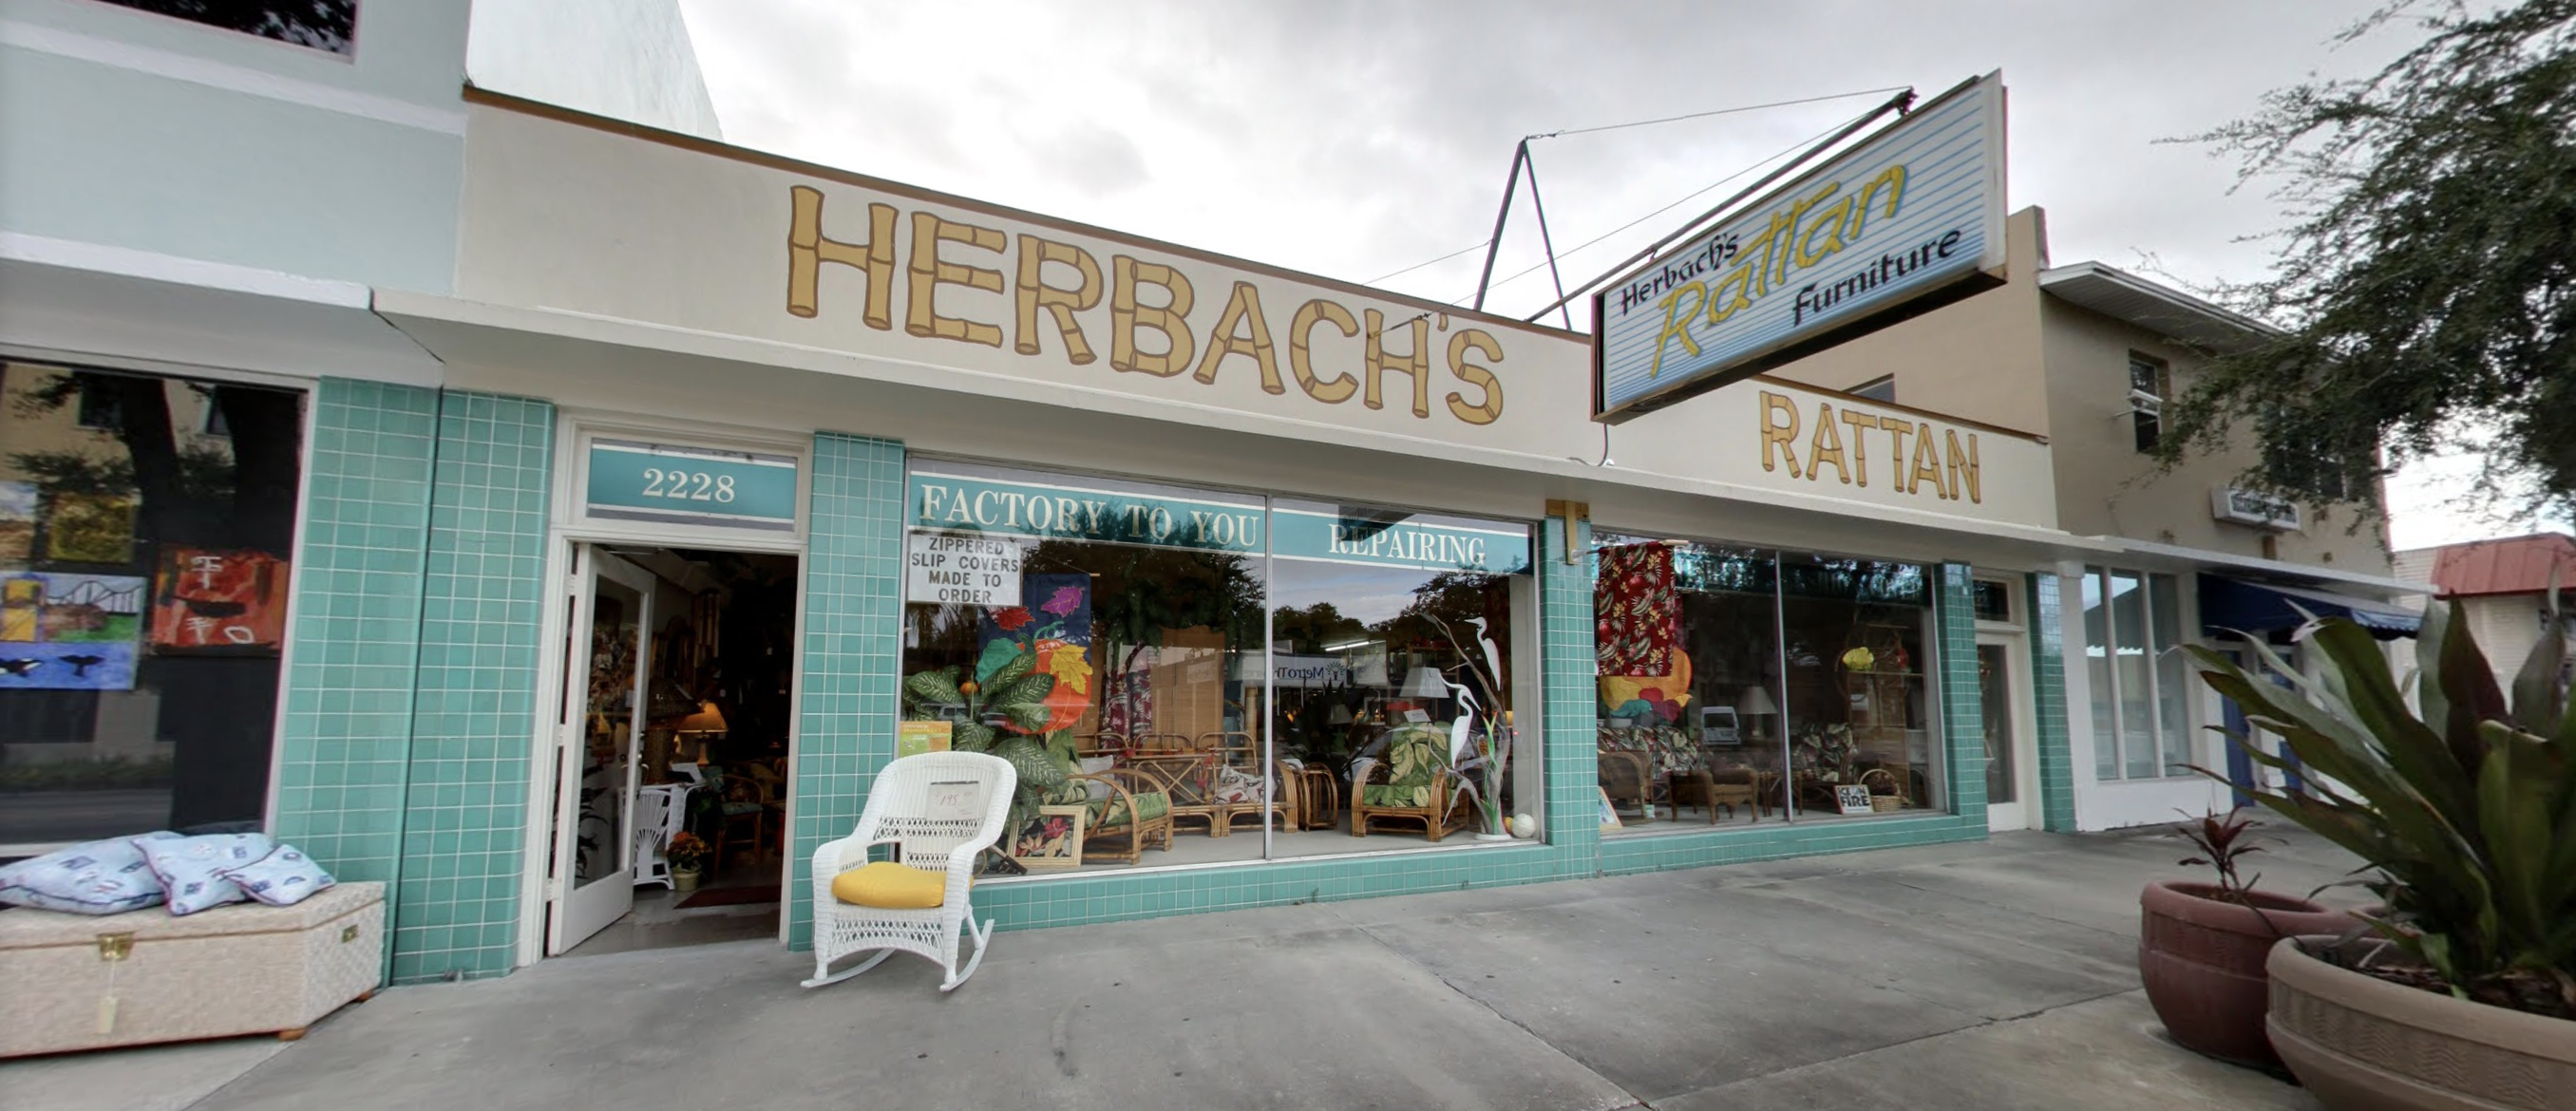 Front of Herbach's Rattan Furniture